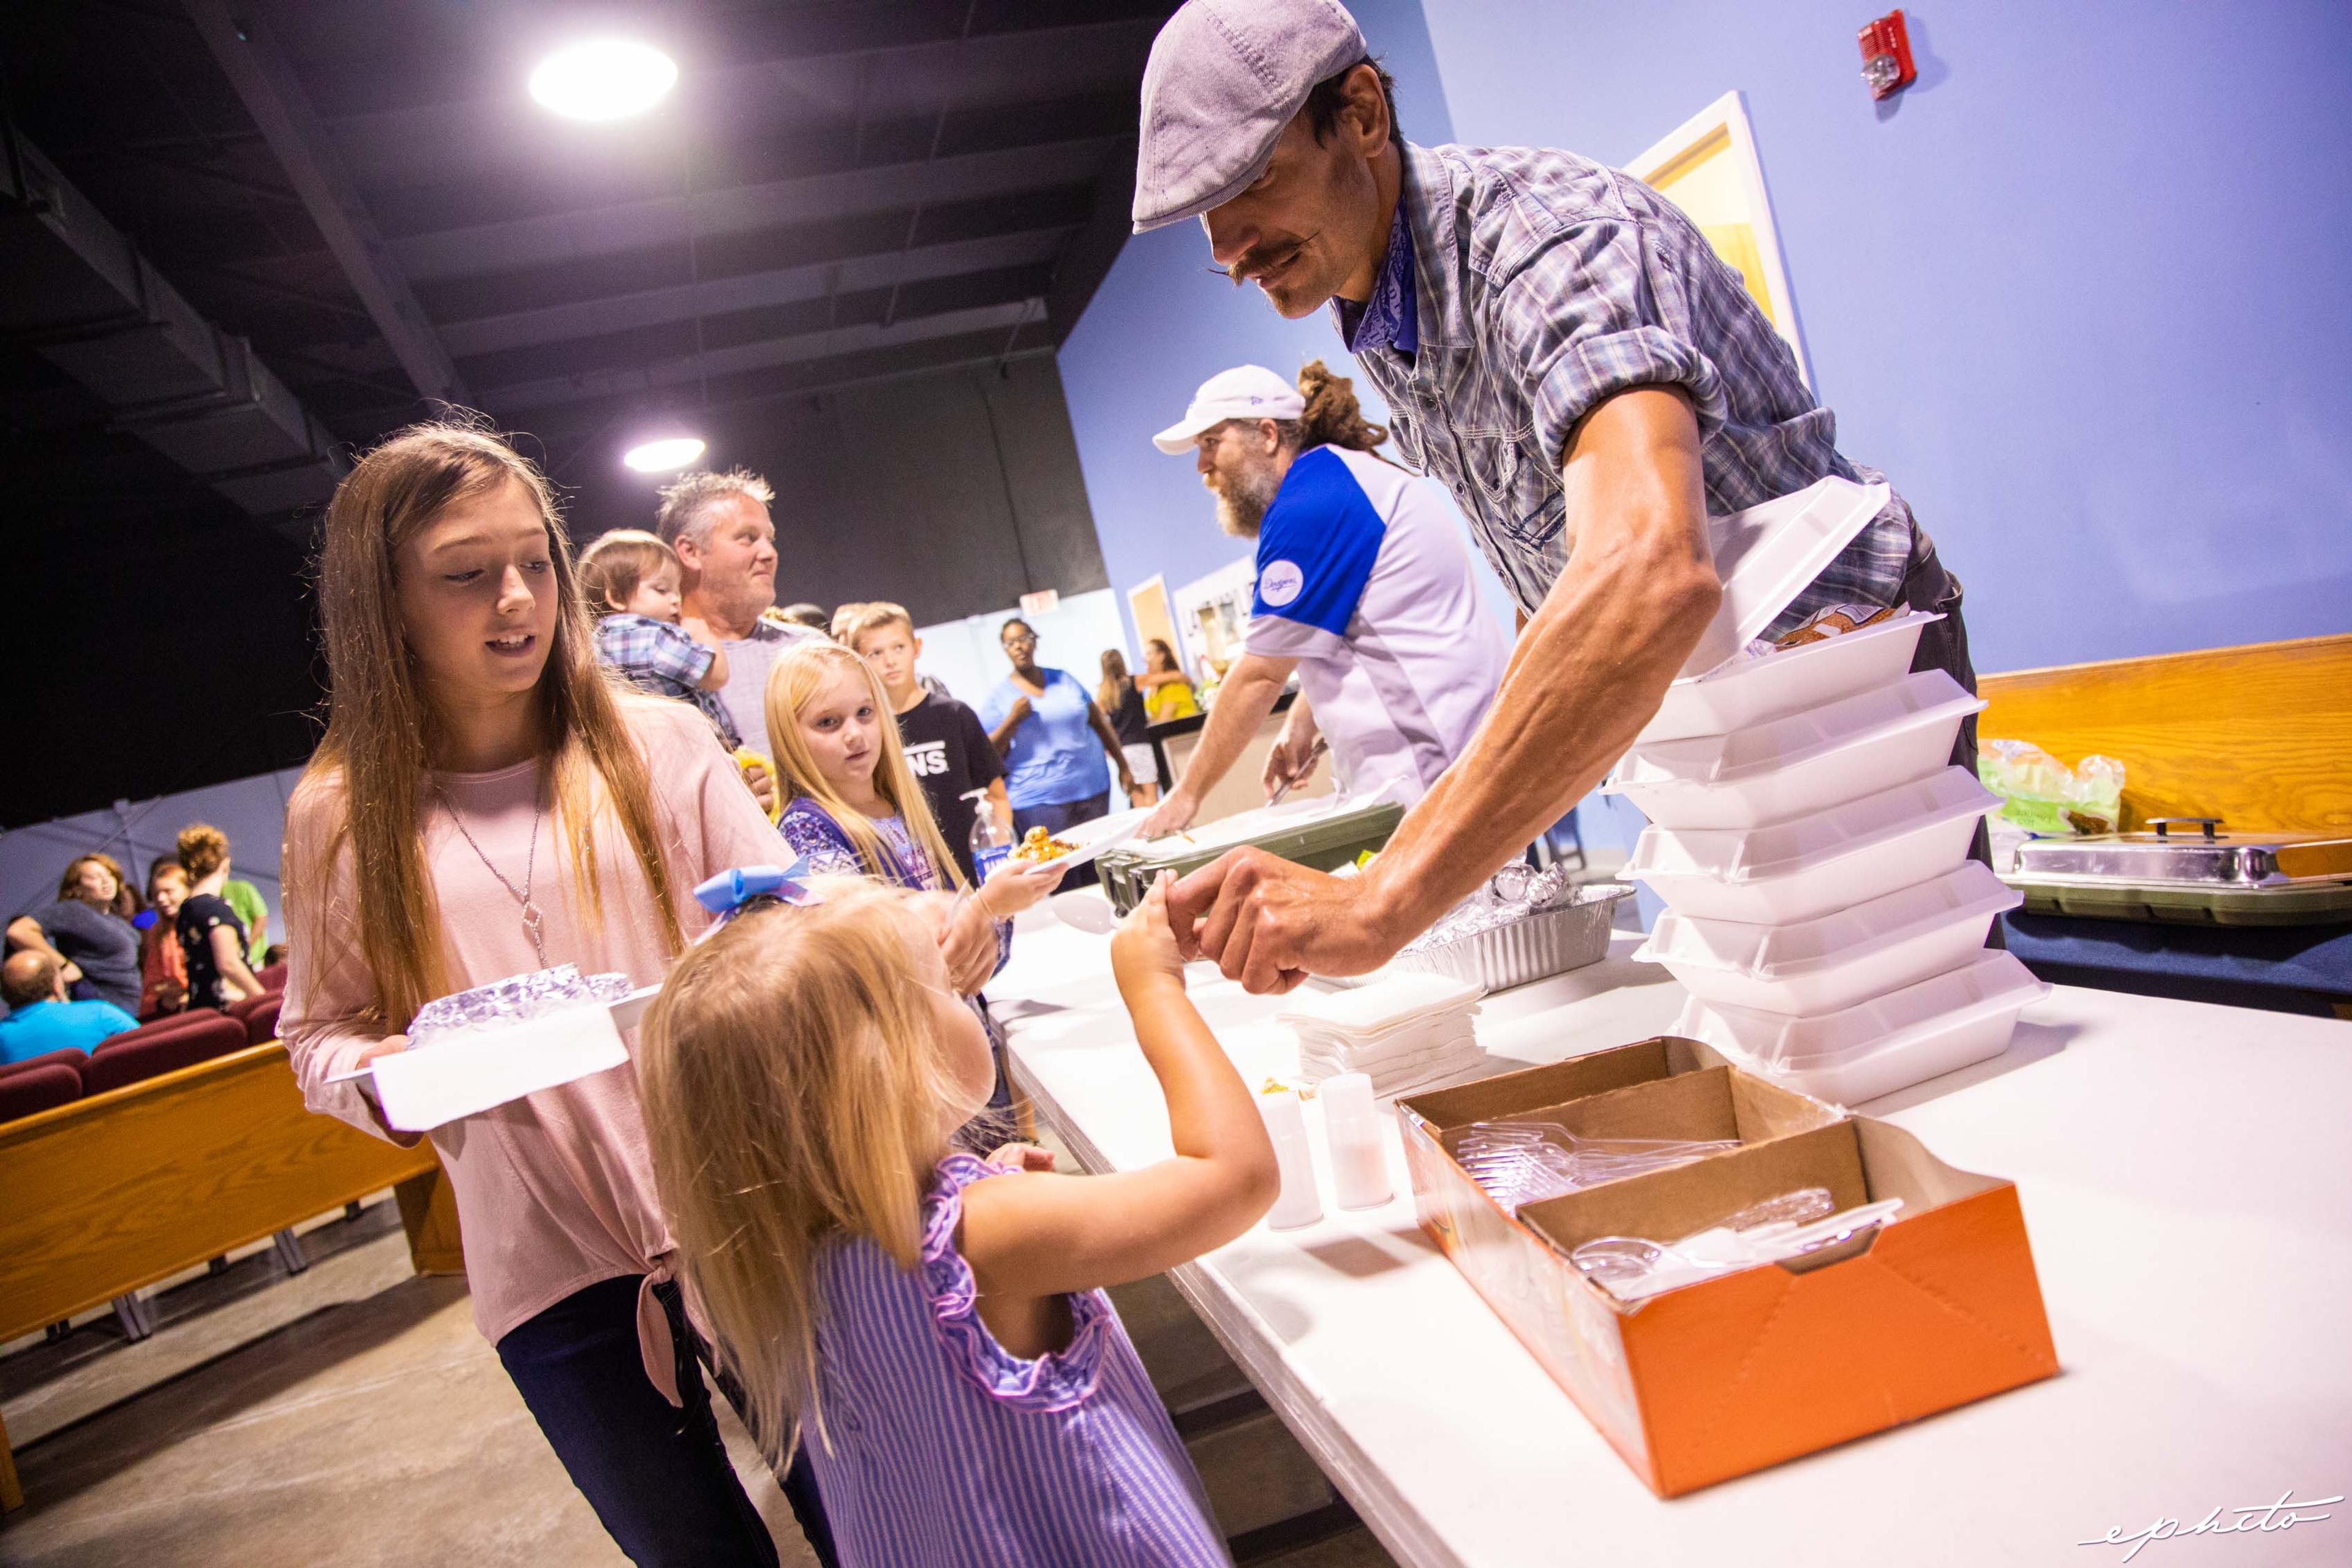 A little girl takes a utensil from a male volunteer in a disaster relief foodservice line.